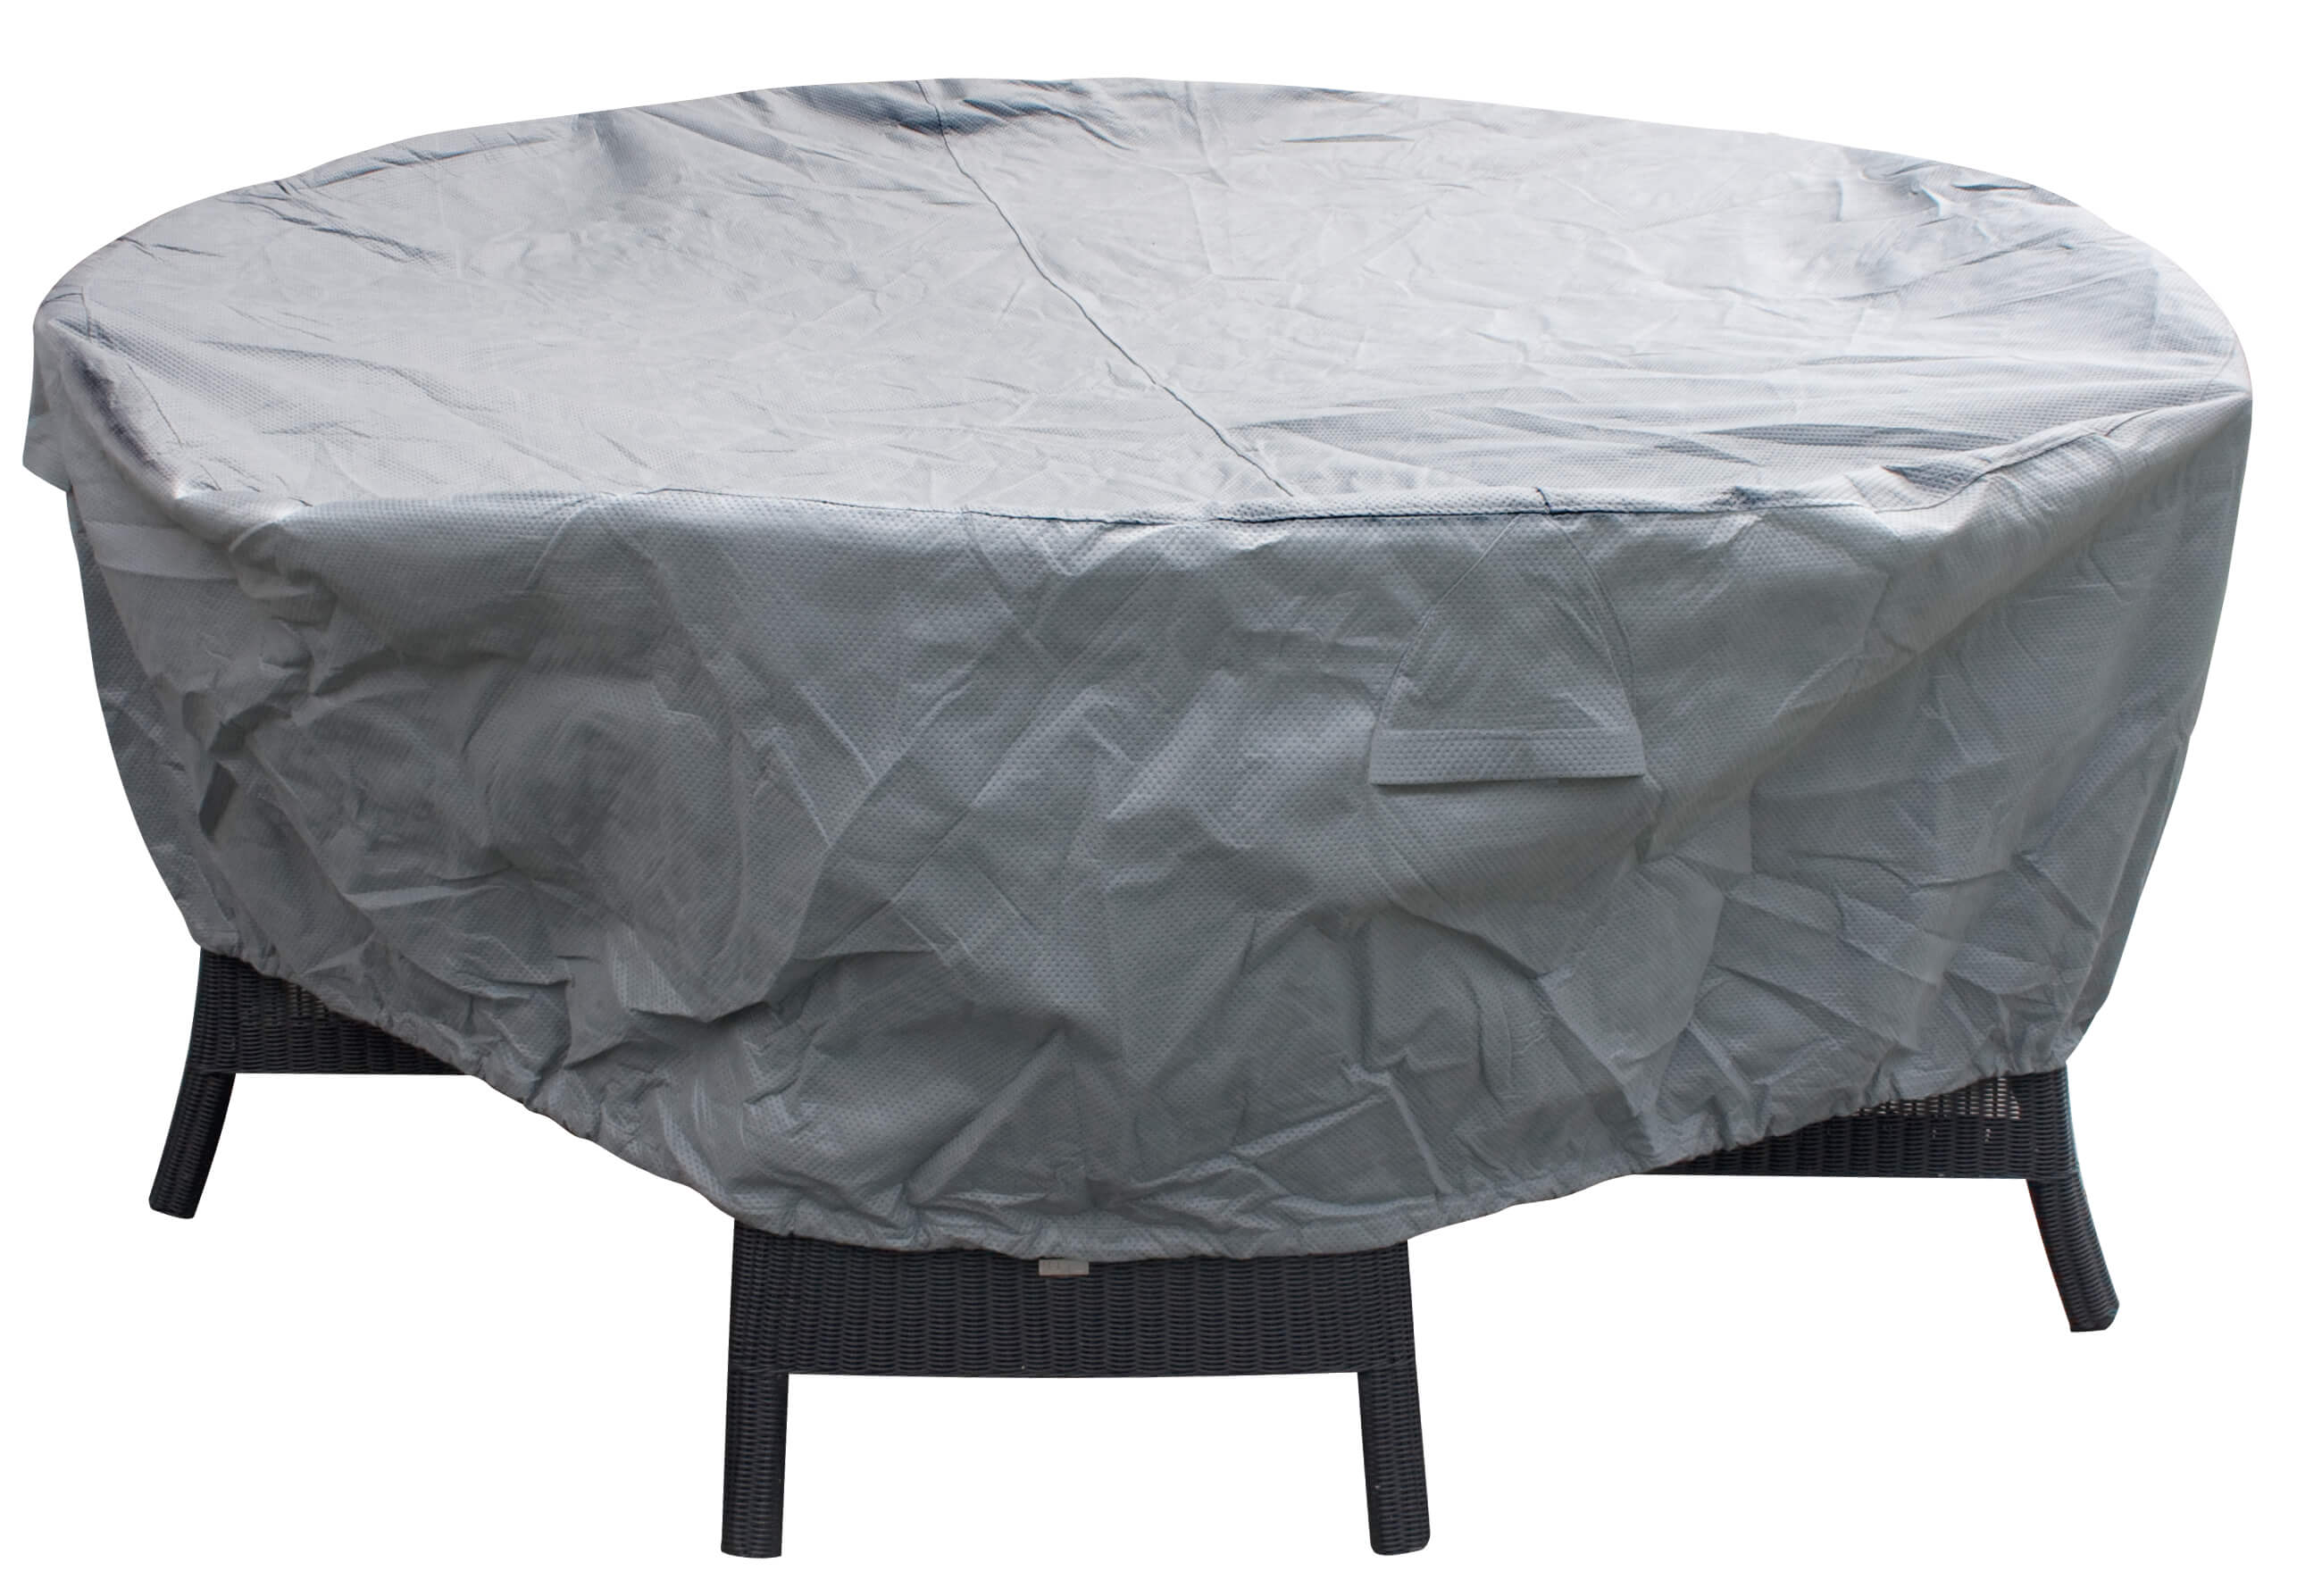 Weather cover for round patio set Ø 320 x 80 cm